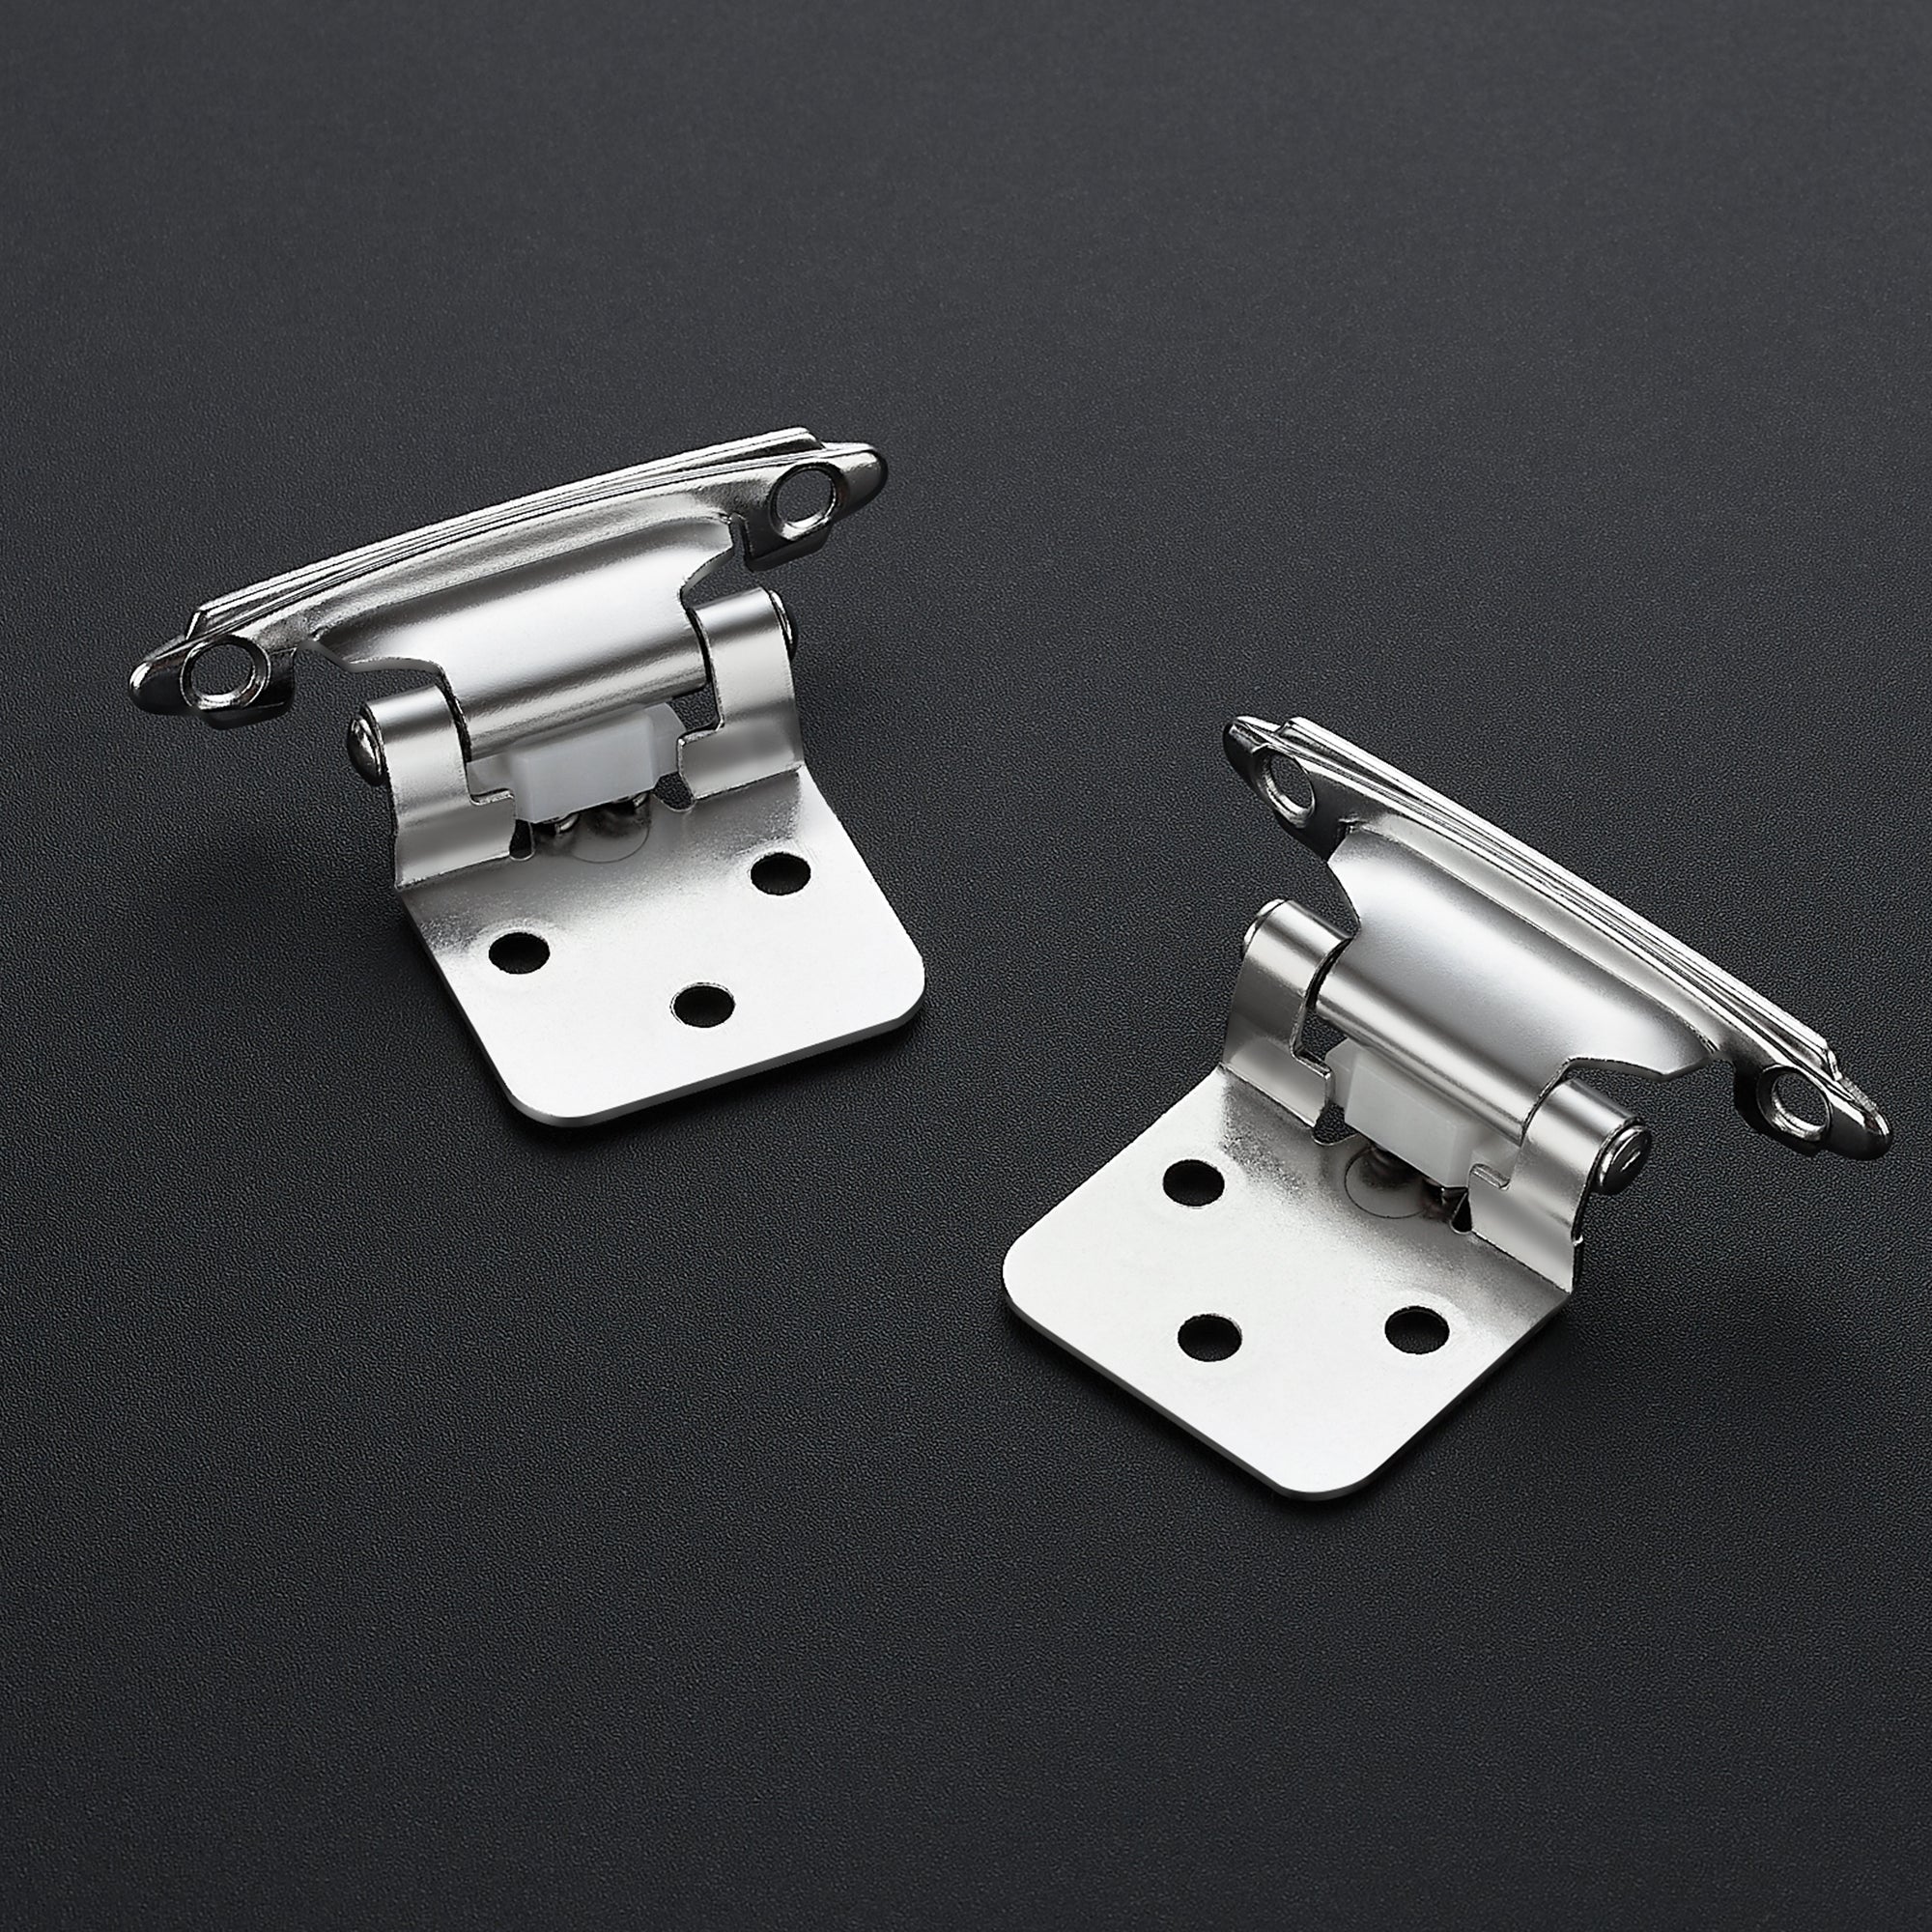 Ravinte 1/2 inch Overlay Cabinet Hinges Polished Chrome Semi-Concealed Cupboard Hinges Face Frame Mount Cabinet Door Hinges Kitchen Cabinet Hinges Self Closing Cabinet Hinges